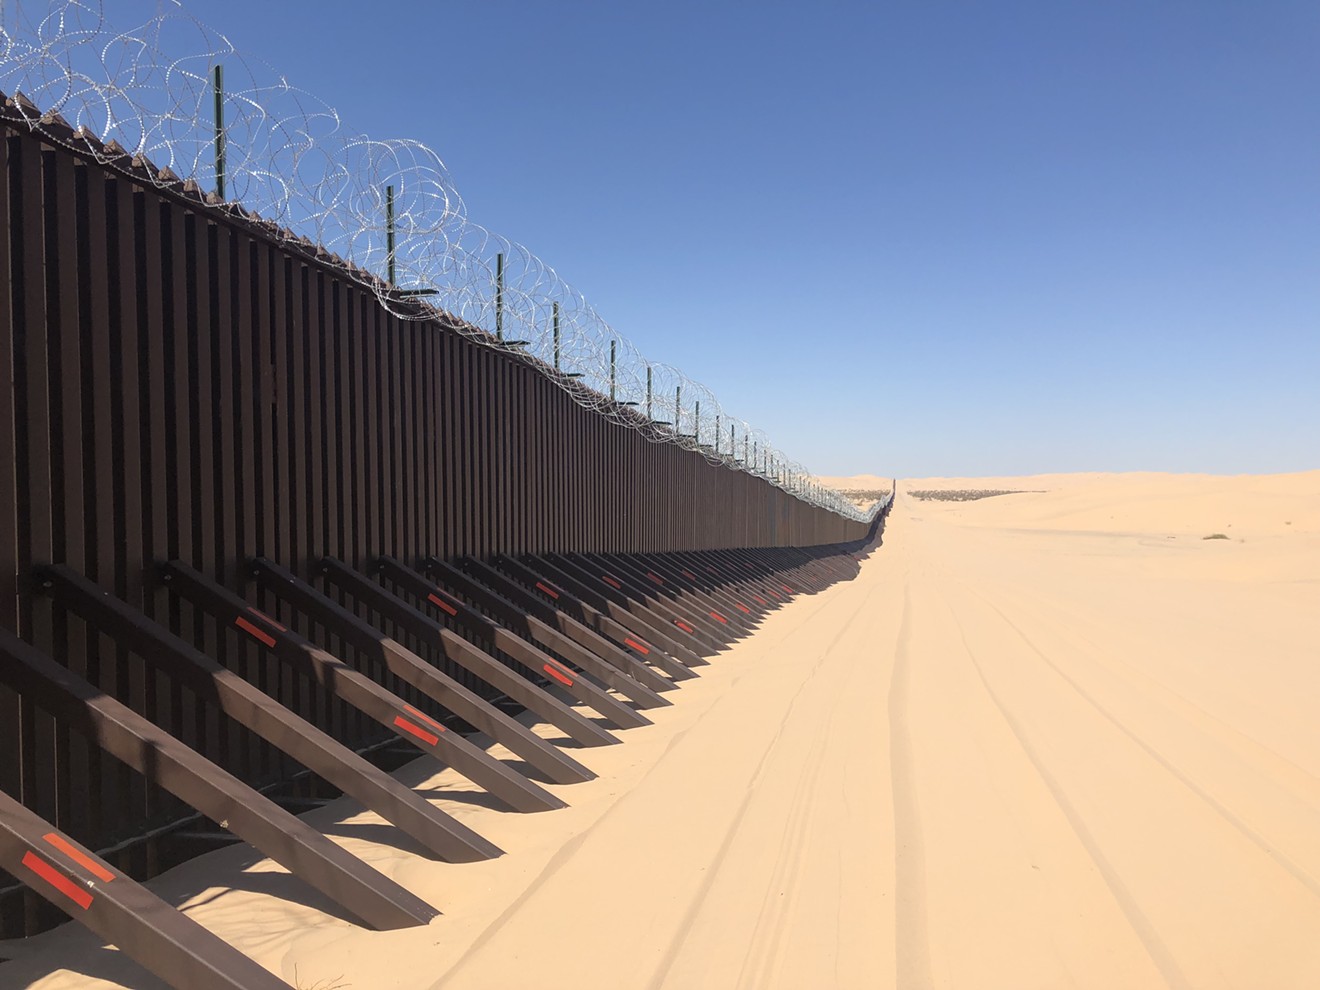 The border wall separating Arizona and Mexico along the Imperial Sand Dunes.